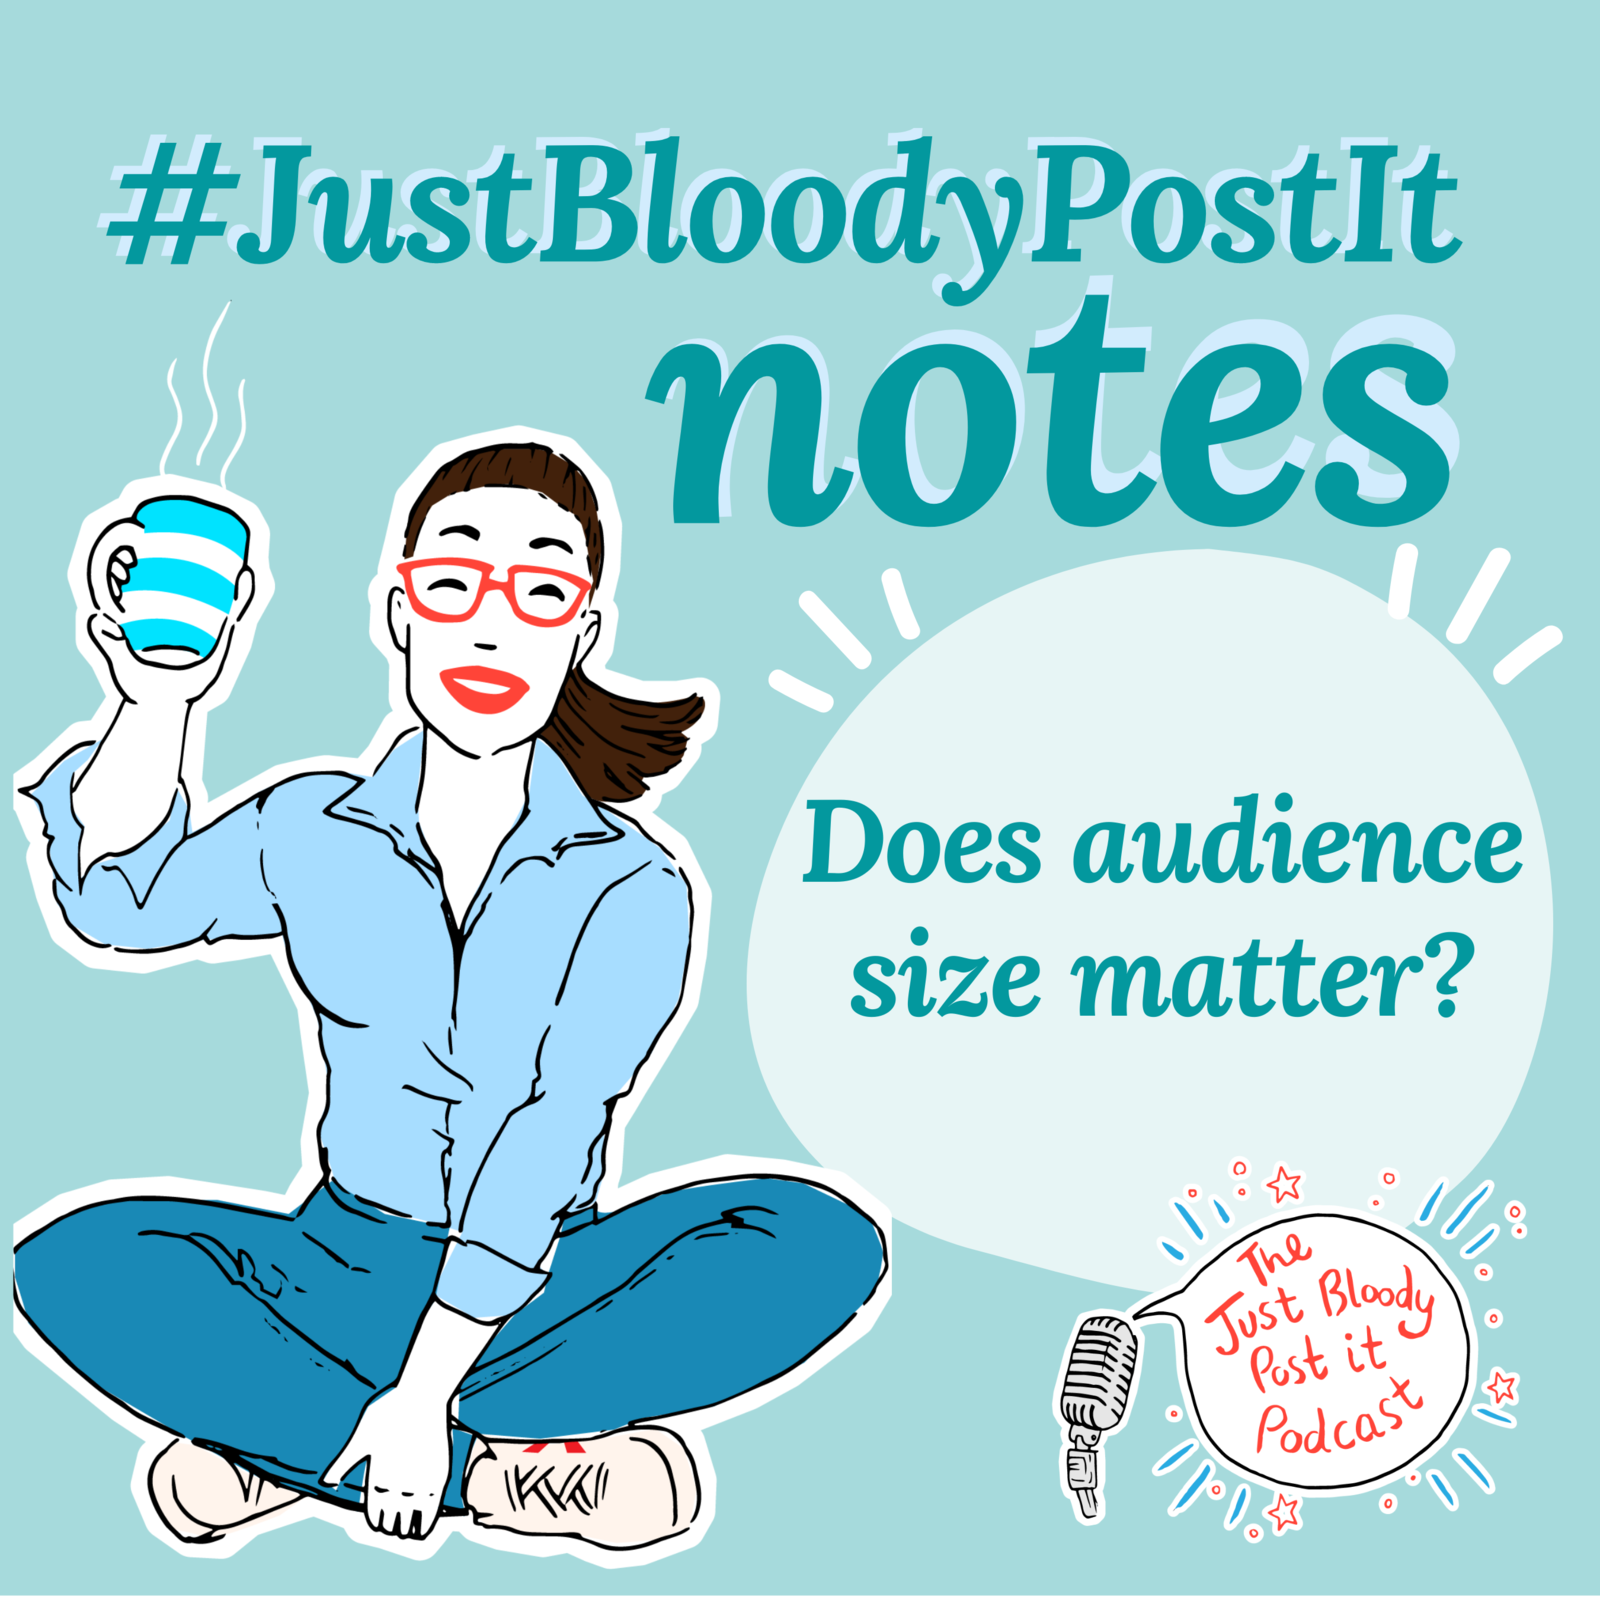 S3 Ep45: Does audience size matter? Answers in this #JustBloodyPostIt Note...